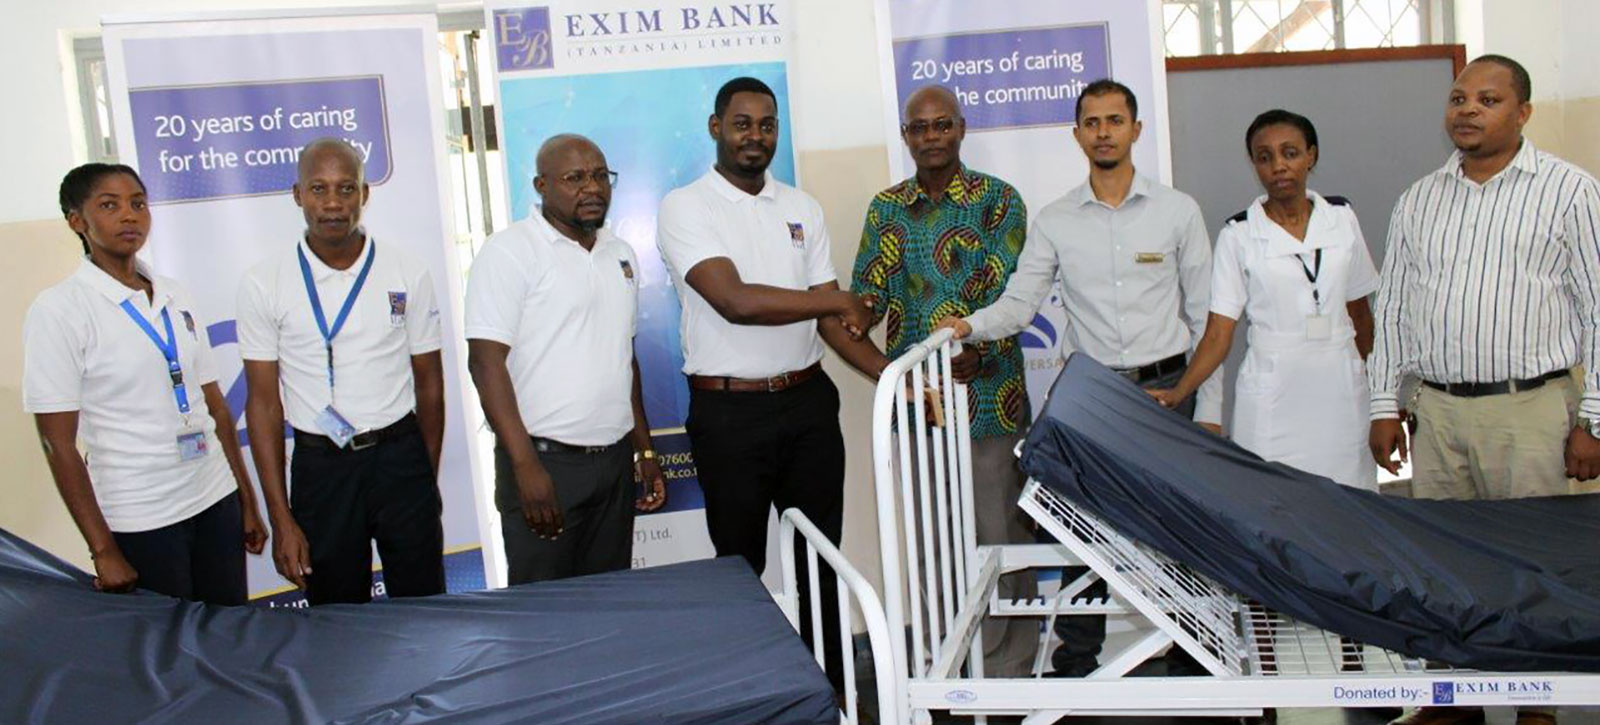 Relief to the Tanga Referral Hospital through Exim Bank's Year-long Campaign